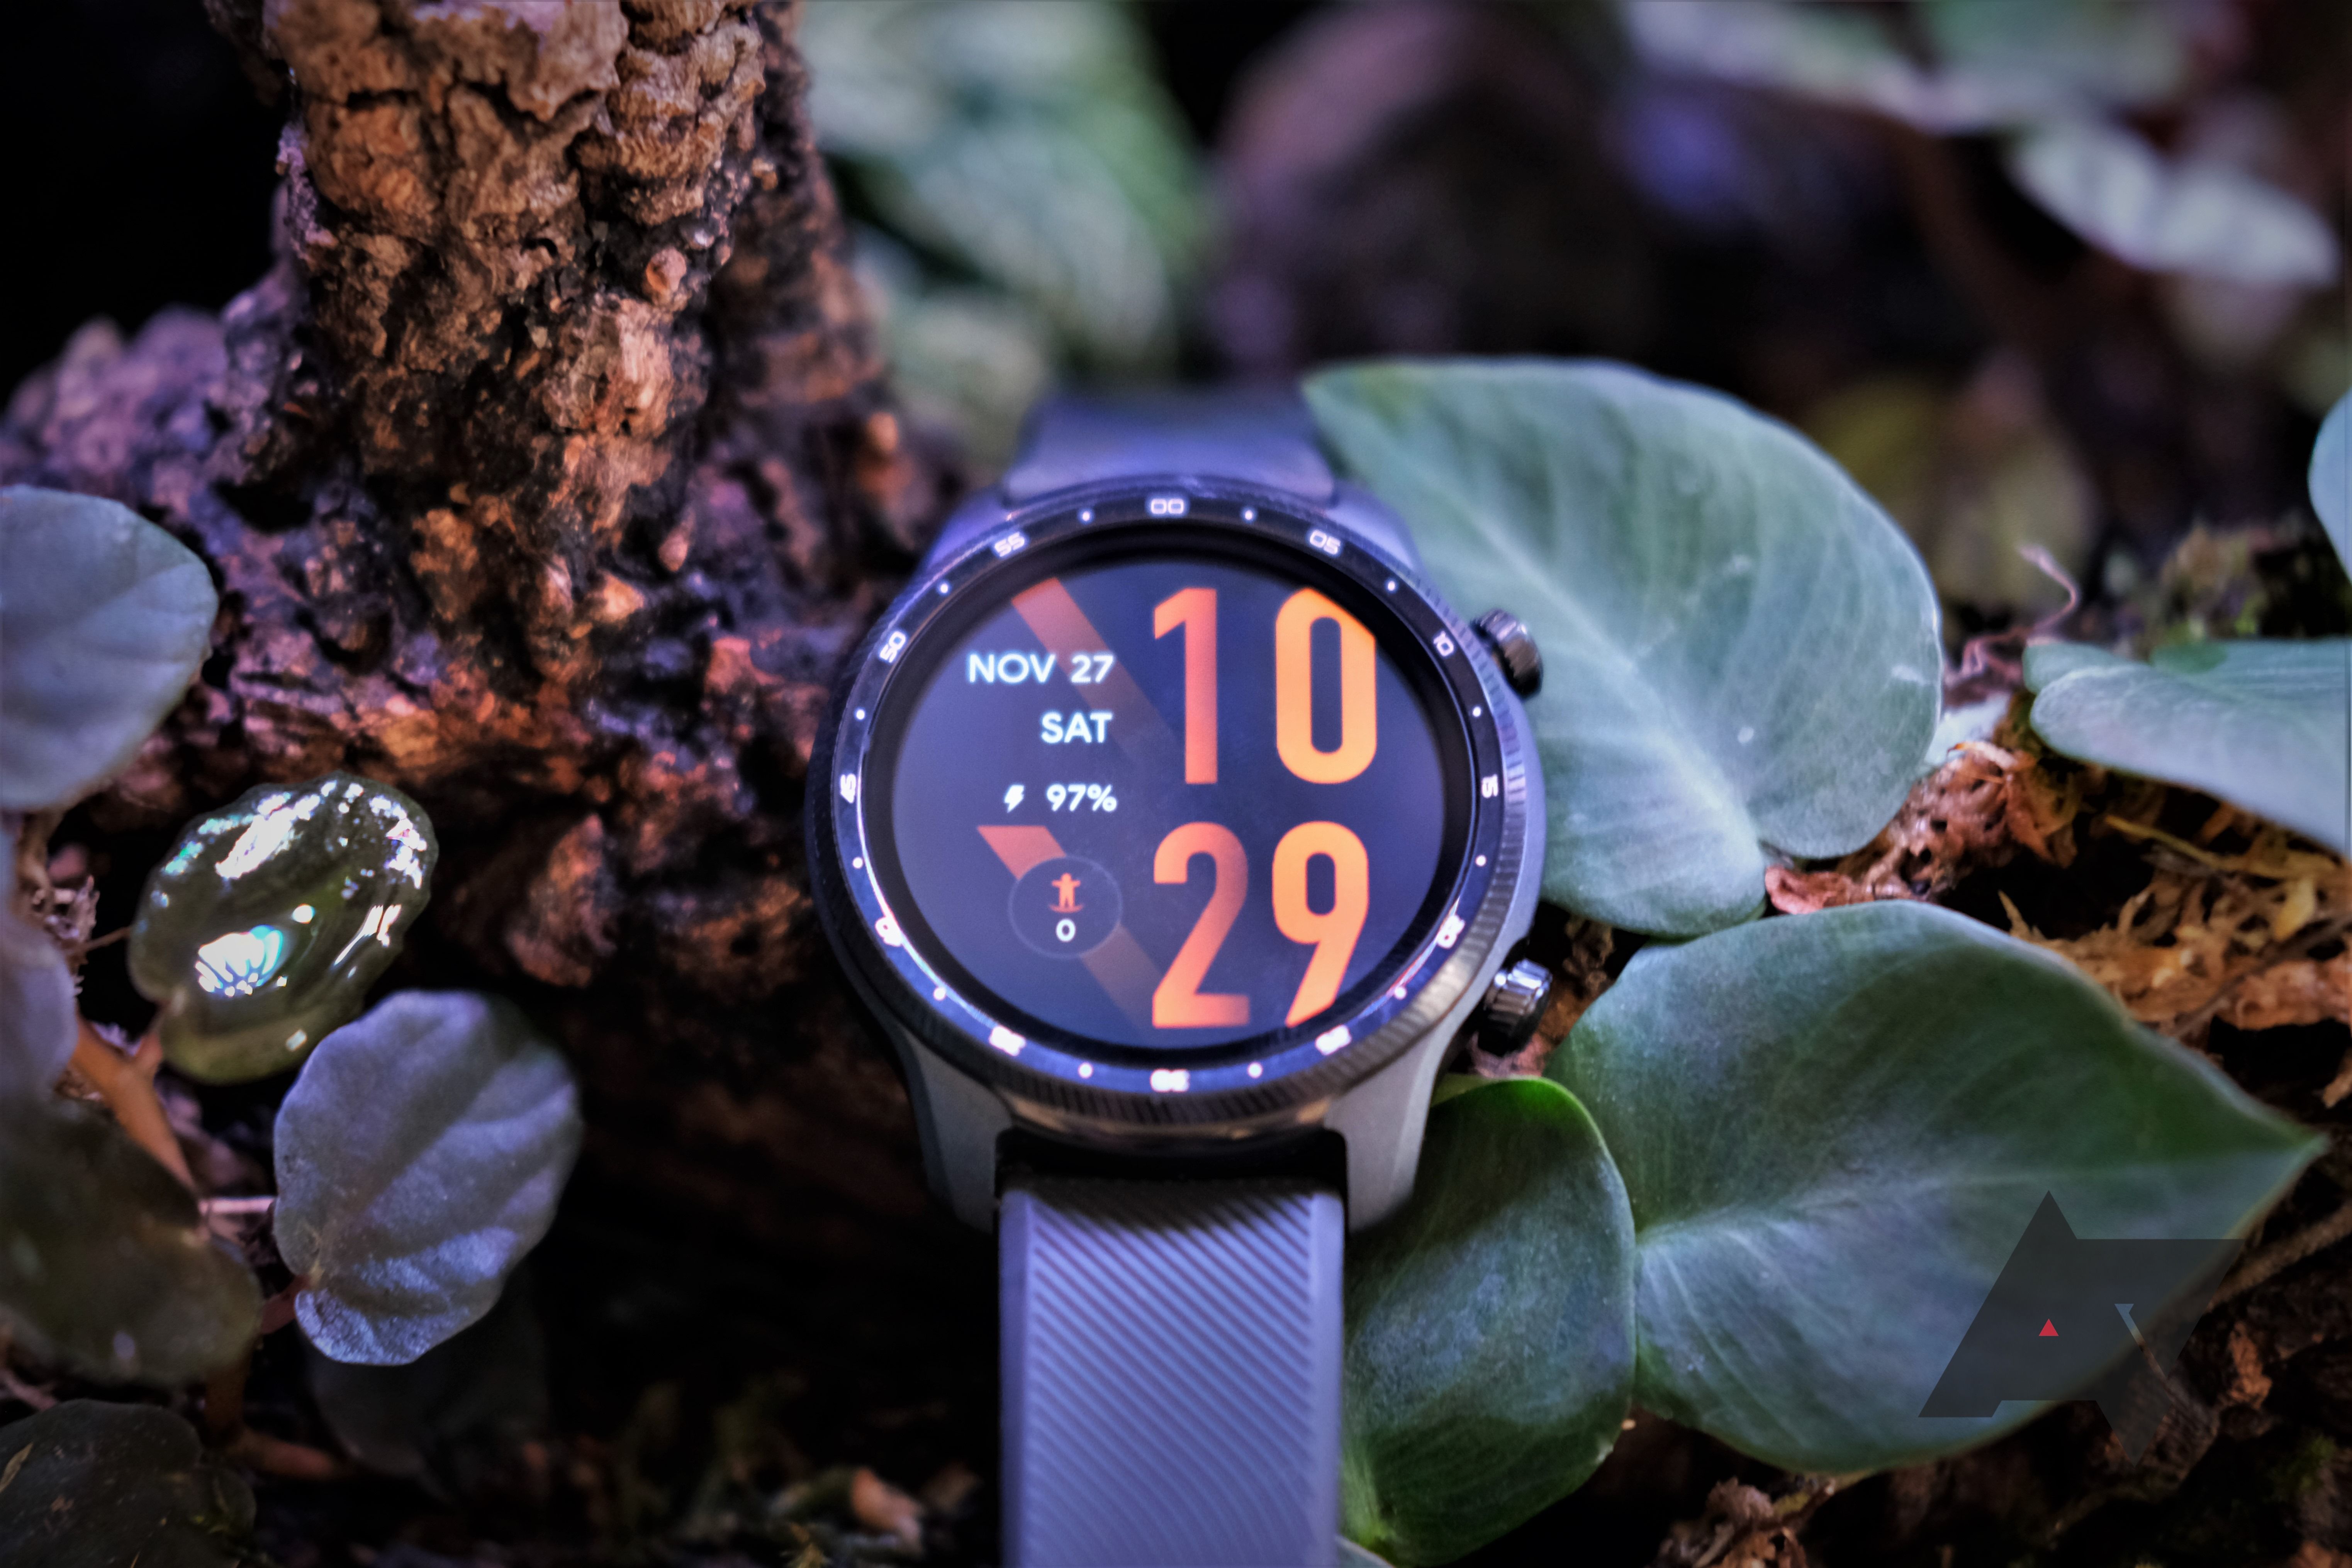 Mobvoi TicWatch Pro 3 review: Wear OS, unrestrained